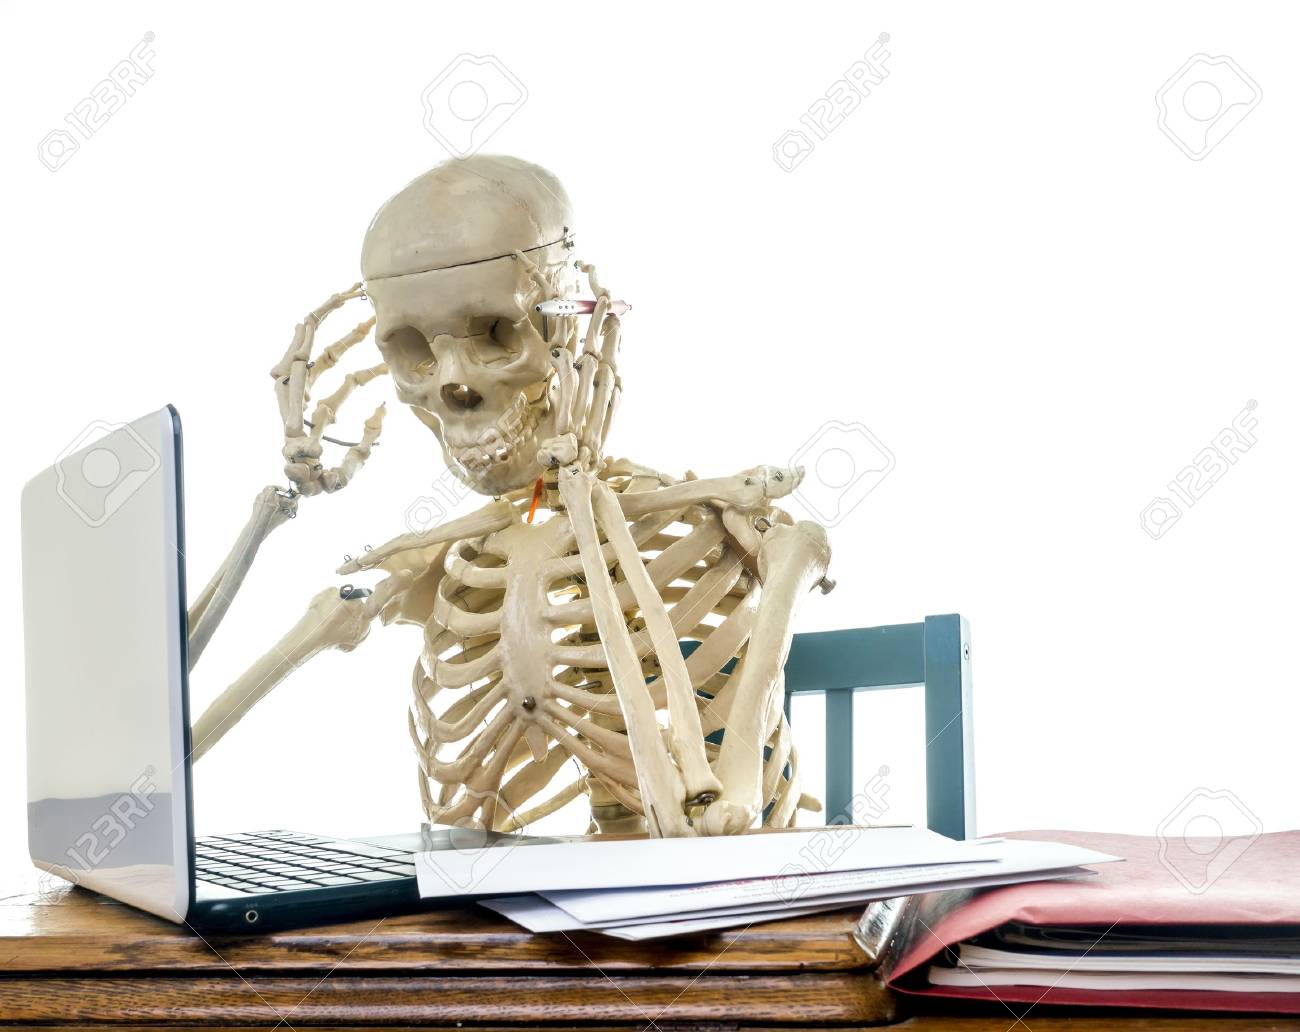 15013098-a-skeleton-getting-a-headache-from-paying-bills-computer.jpg